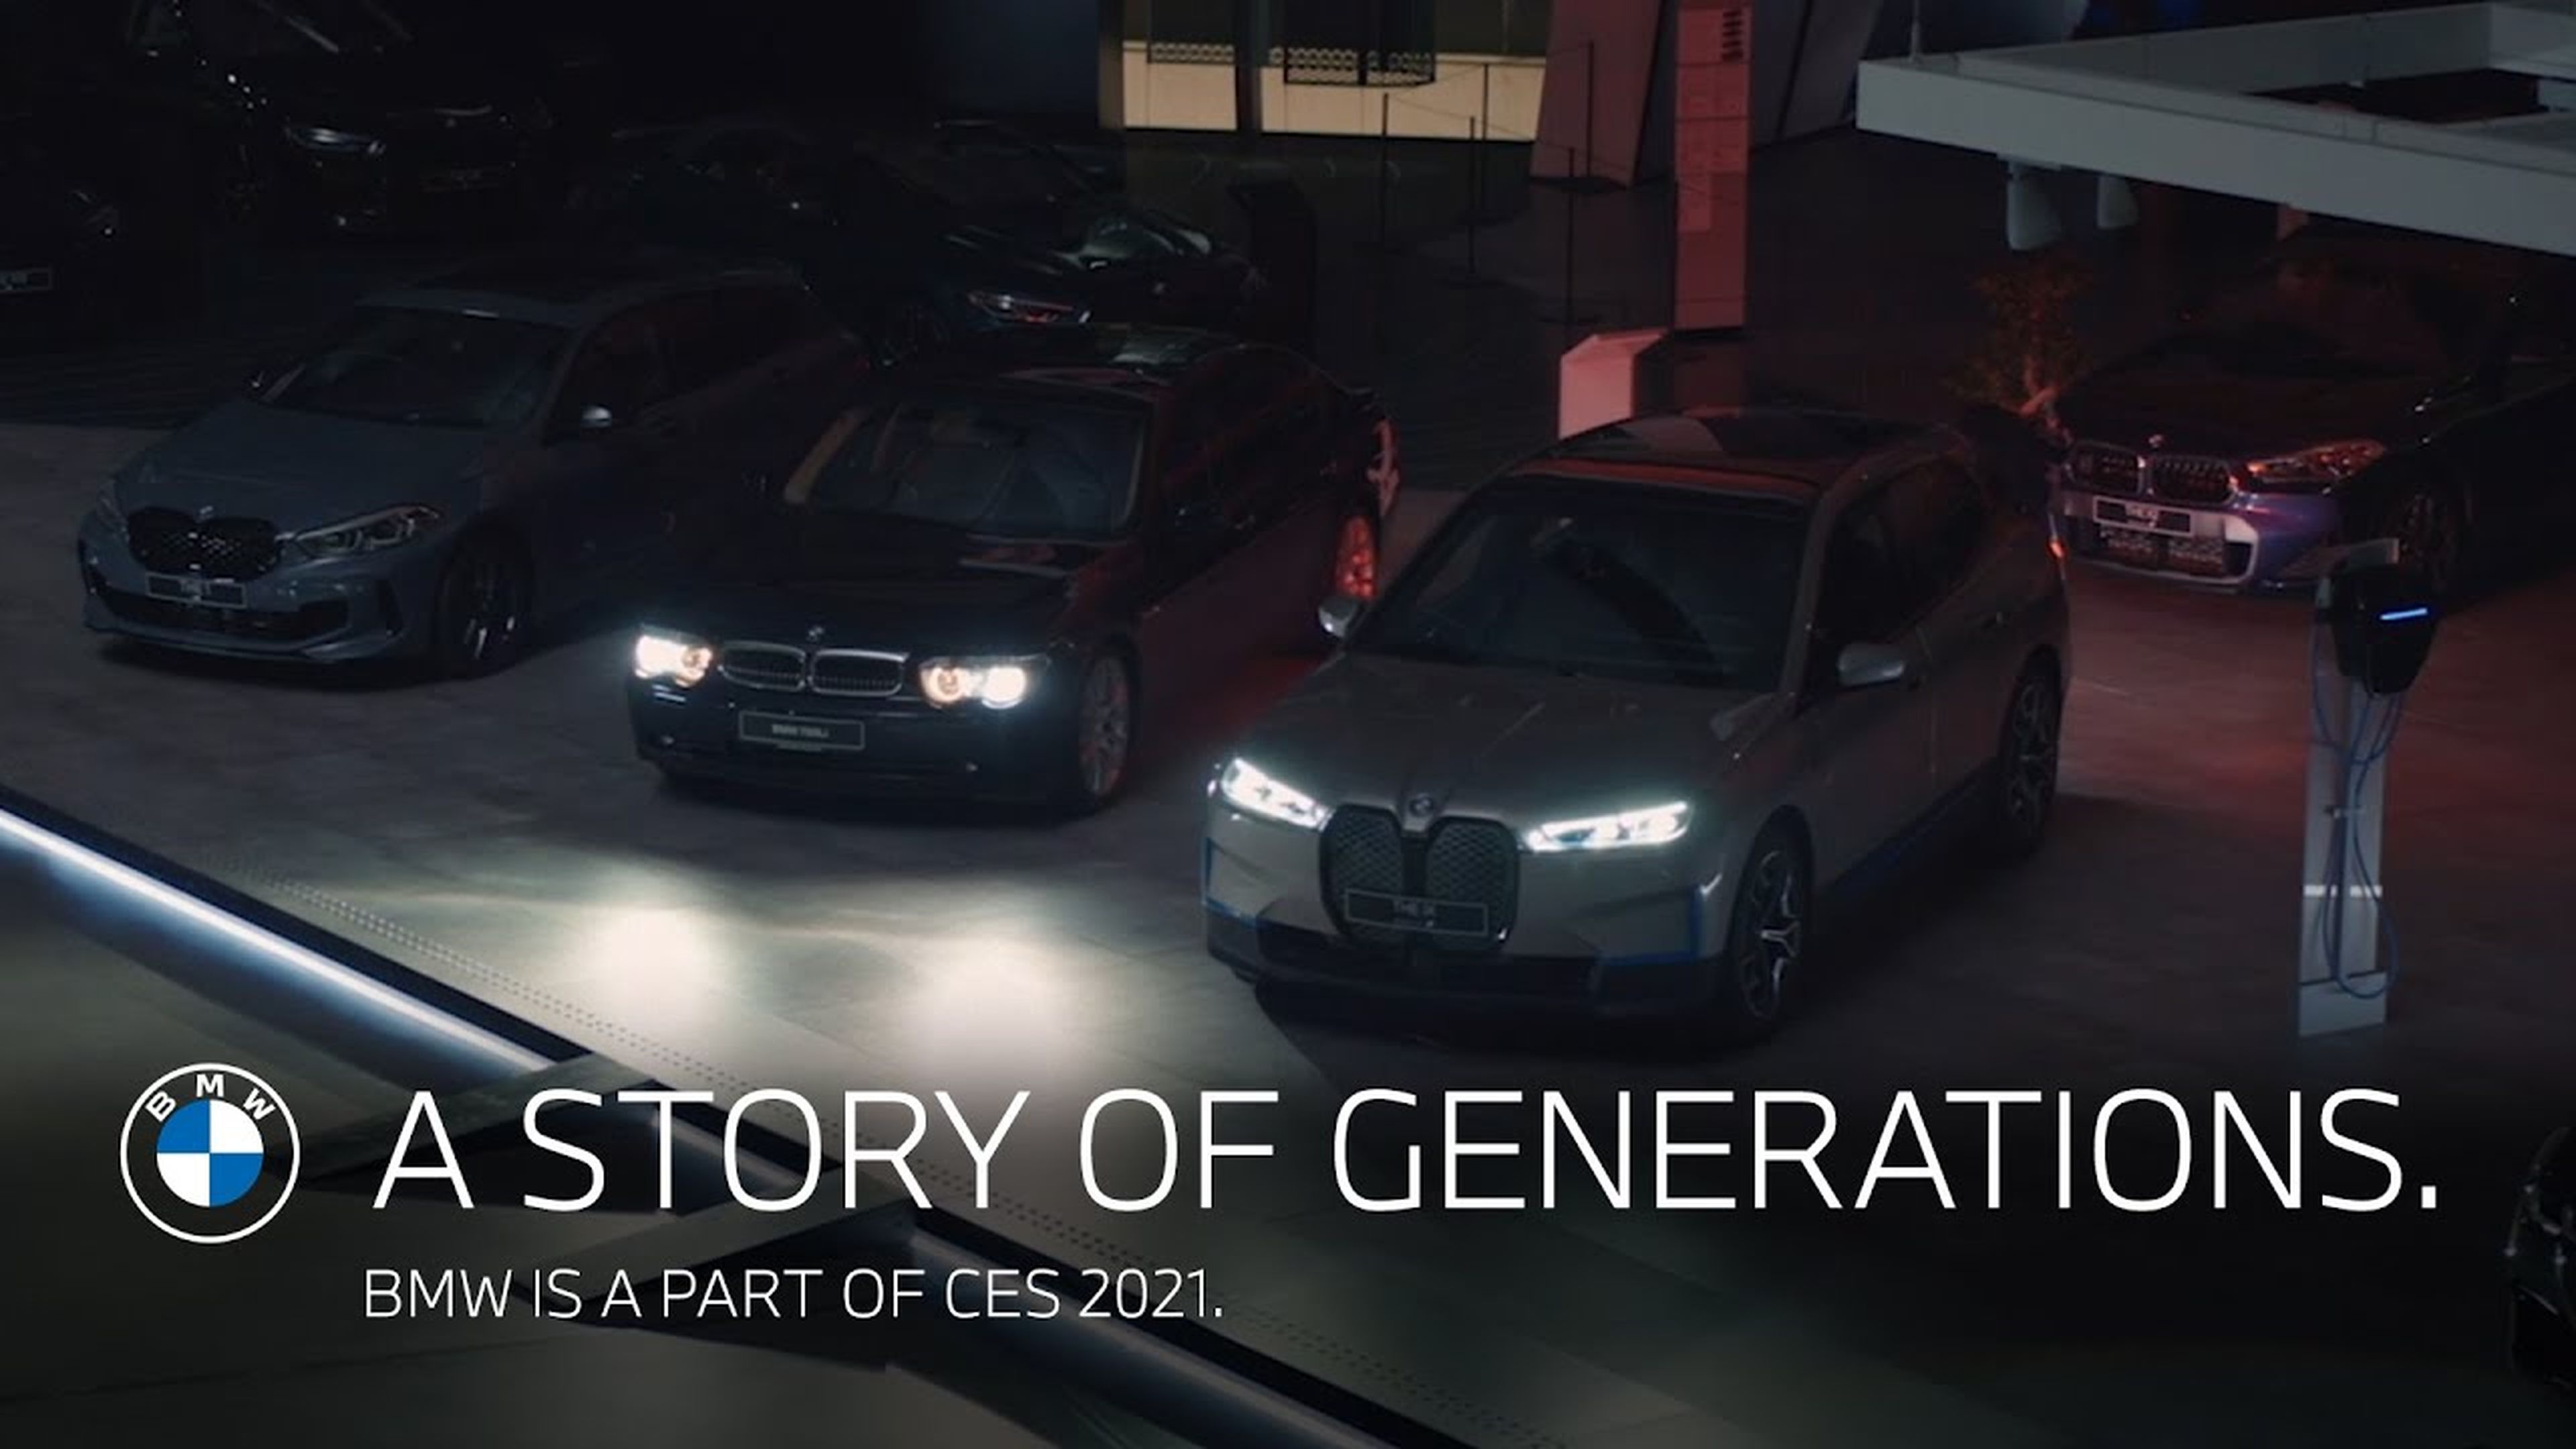 A story of generations. BMW is a part of CES 2021.